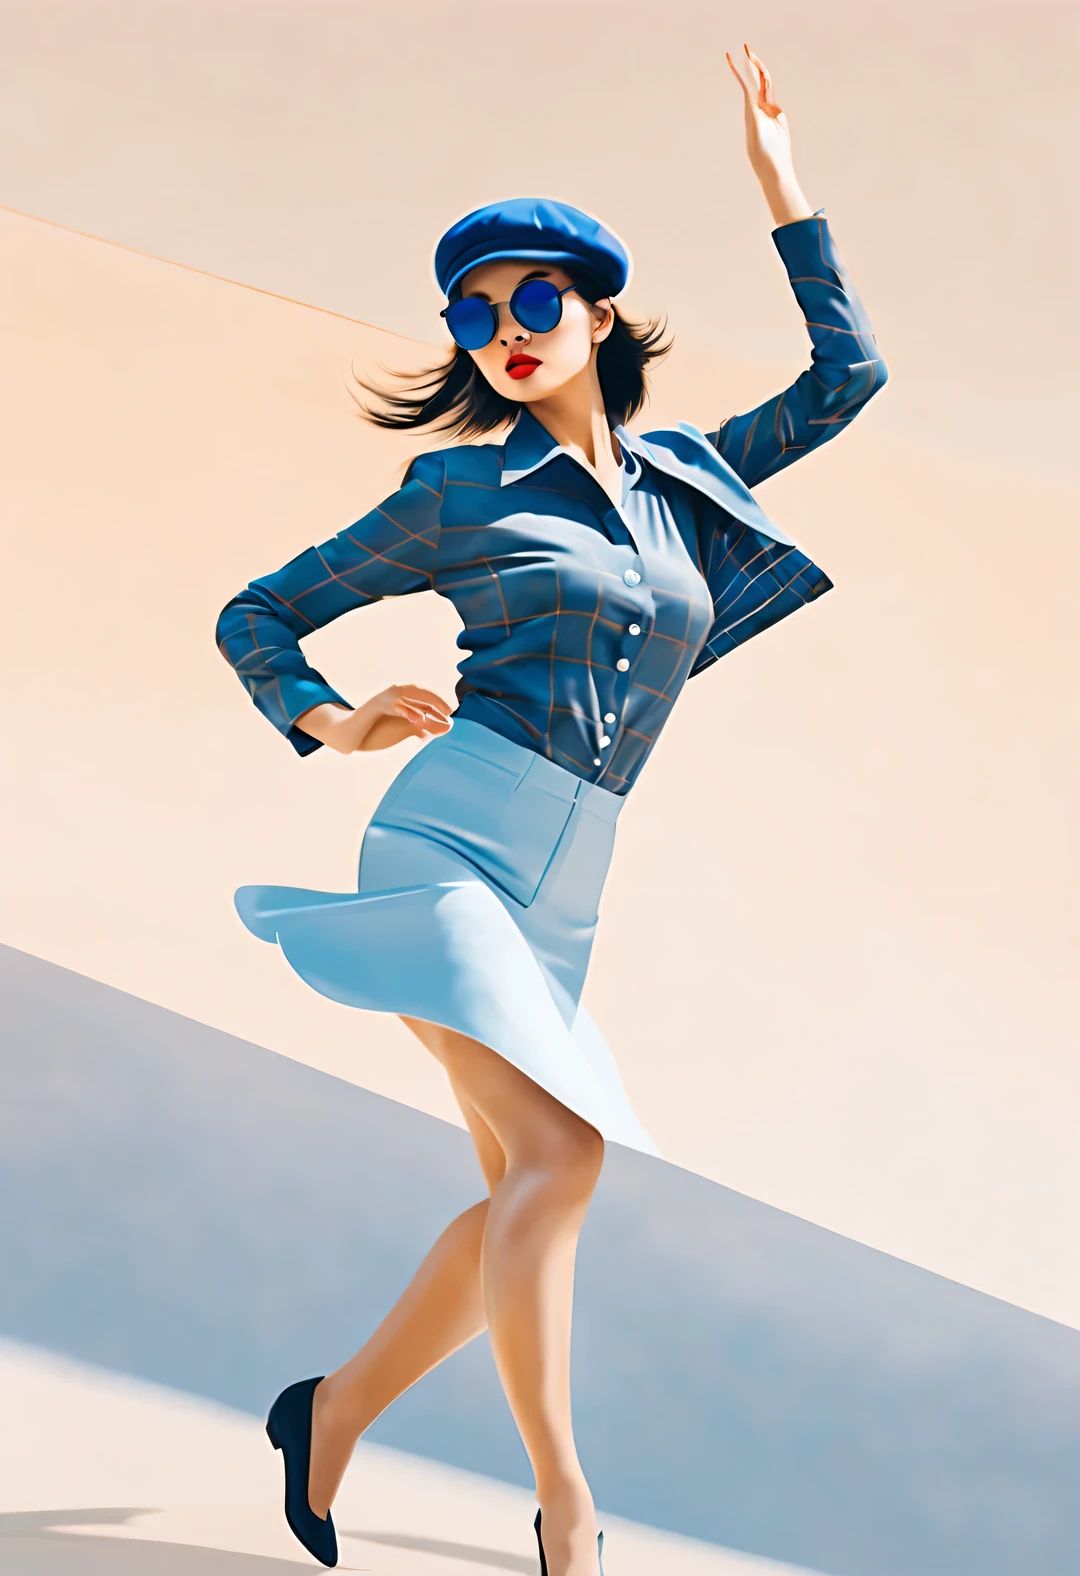 (Modern art dance simple poster design), (Half-length close-up), (Beautiful Chinese girl dancing in the air), (Wear modern fashionable winter fashion: 0.8), (Wear sunglasses and beret: 1.2), Camel coat with blue plaid shirt, Show academic elegance, Presenting classic and fashionable European style, Girl fair and flawless smooth skin, high nose bridge, Head up posture, sad yet beautiful, slim body, Exquisite facial features,
swirling fog illustration, ink painting, black hair, a ball head, Proud, Surrealism, contemporary art photography, action painting illustration, abstract expressionism, Pixar, depth of field, motion blur, backlight, Fall out, decline, Elevation viewing angle, Sony FE General Manager, ultra high definition, masterpiece, Accuracy, textured skin, Super details, high detail, high quality, Award-winning, best quality, Level, 16k, Shot from a bottom-up perspective,